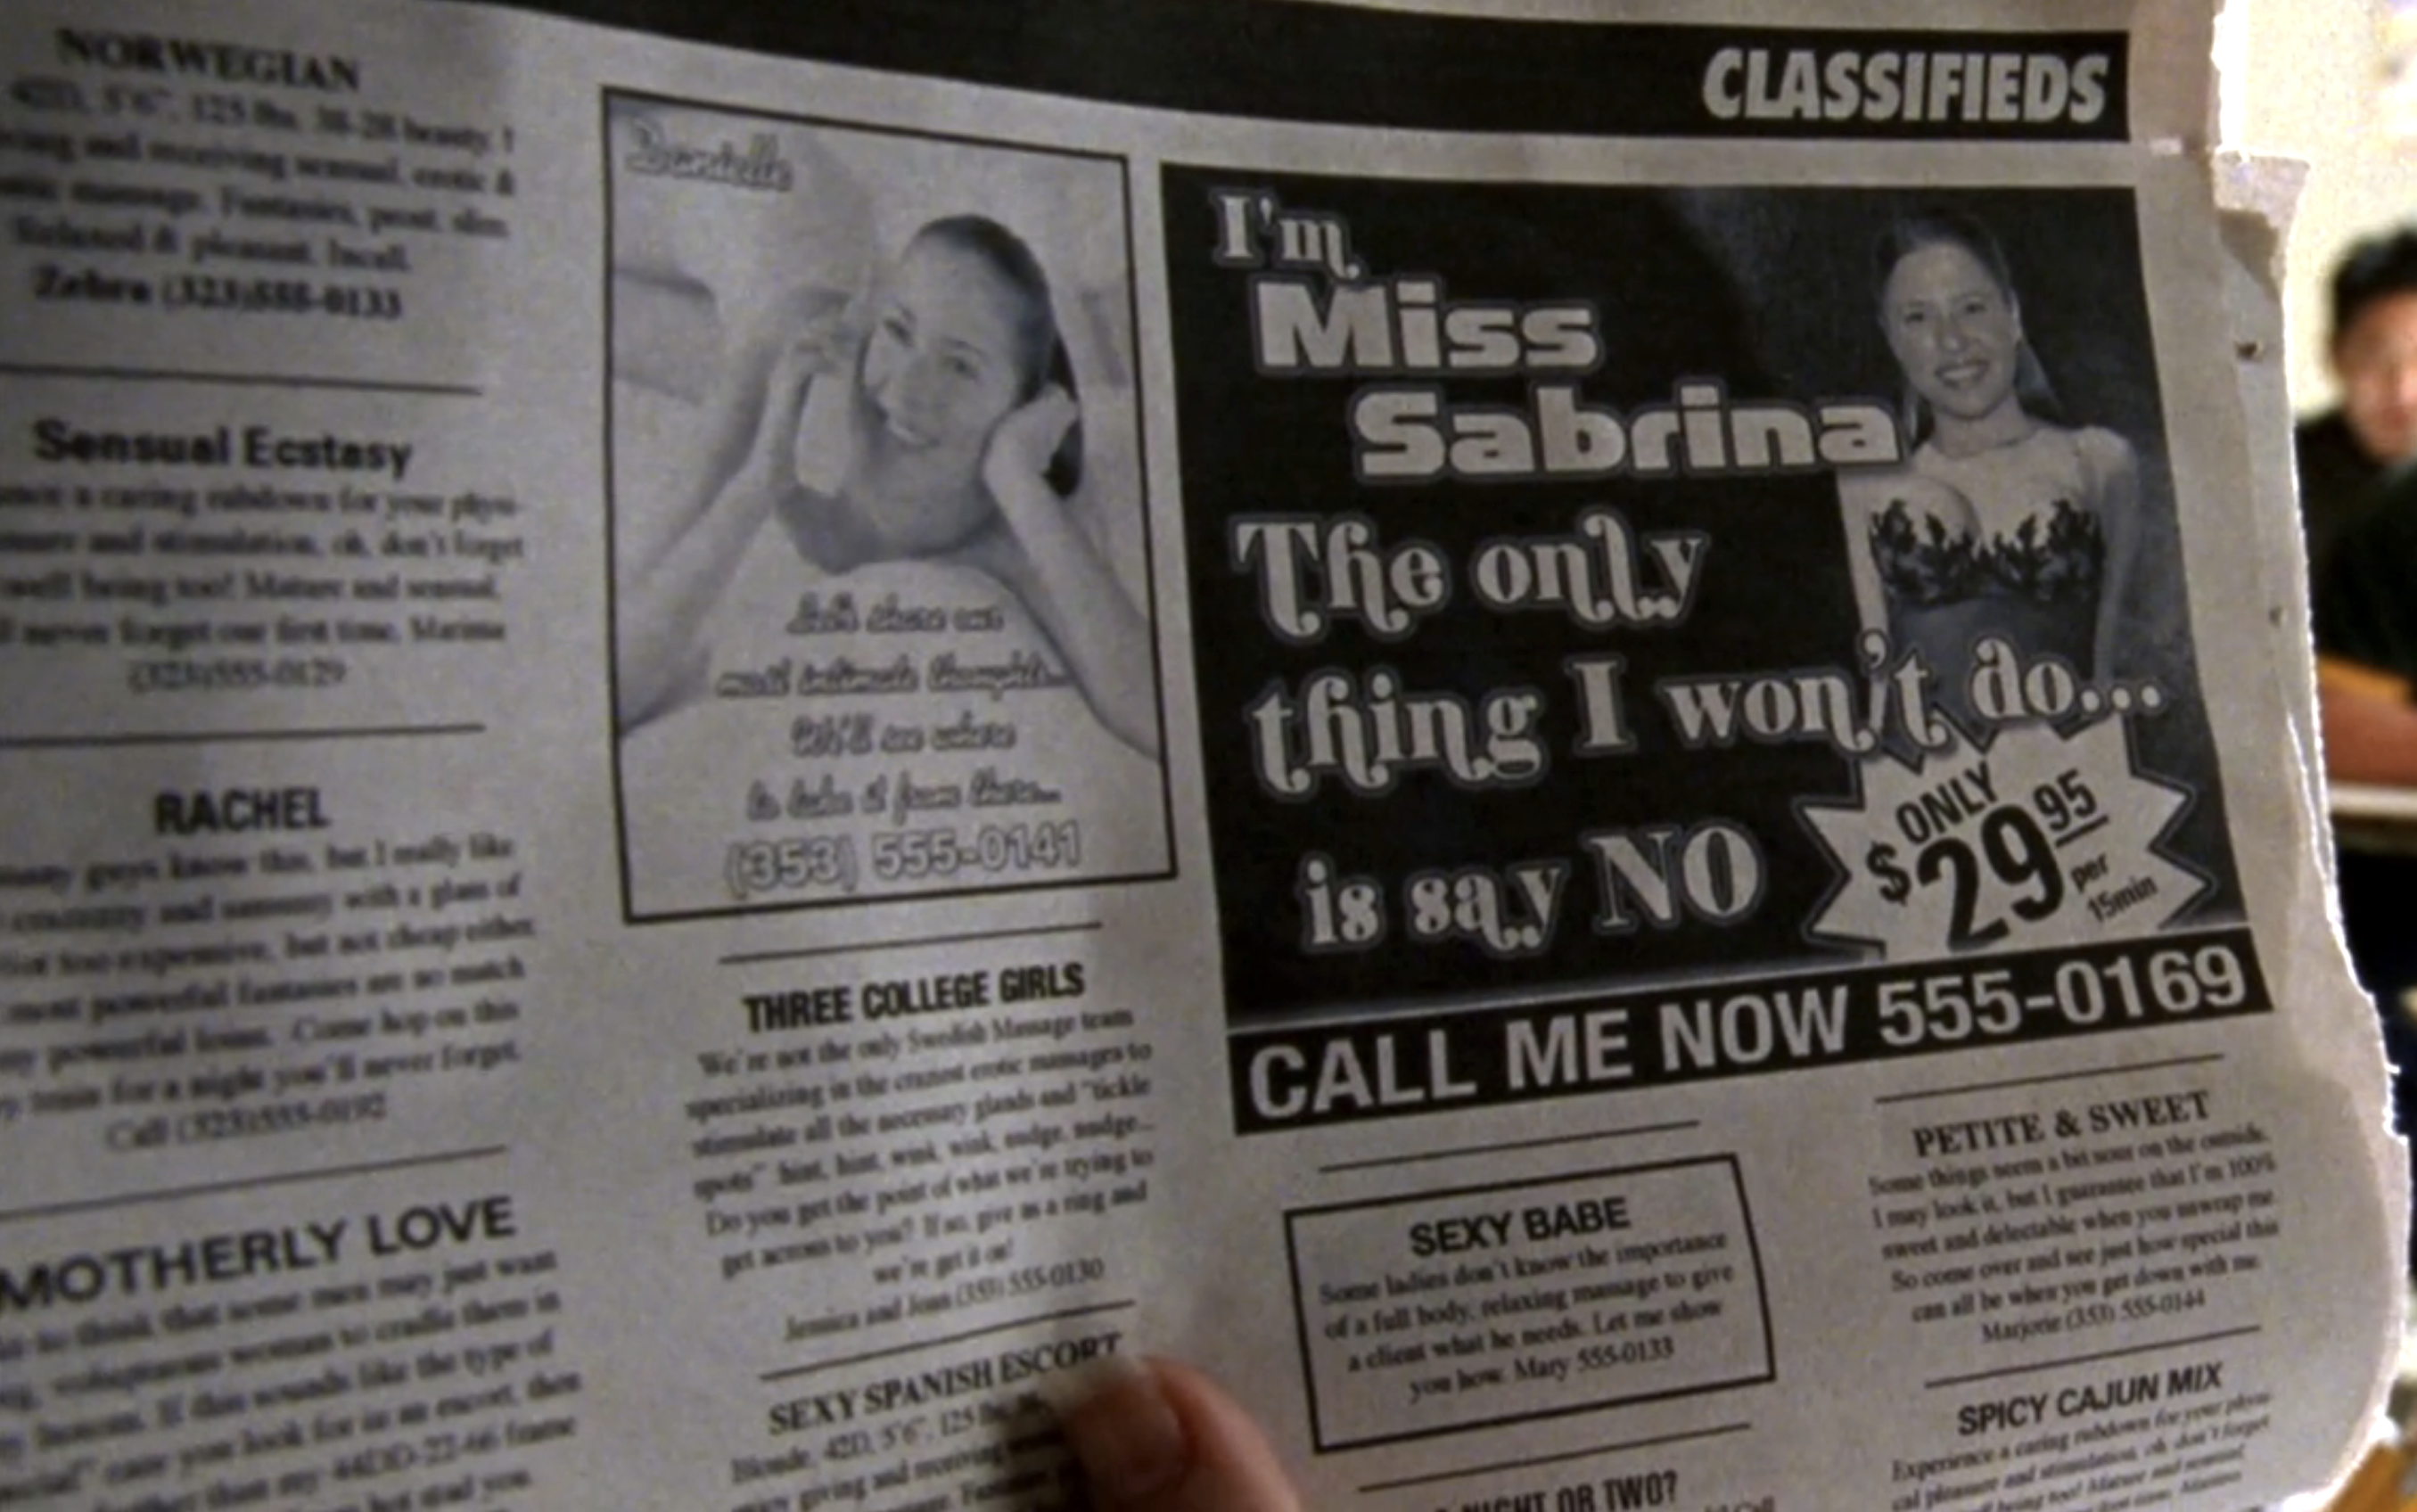 Screenshot from S1E17 of Veronica Mars. A page from the classifieds of a newspaper. The largest ad reads "I'm Miss Sabrina. The only thing I won't do is say no. Only $29.95 per 15 min."